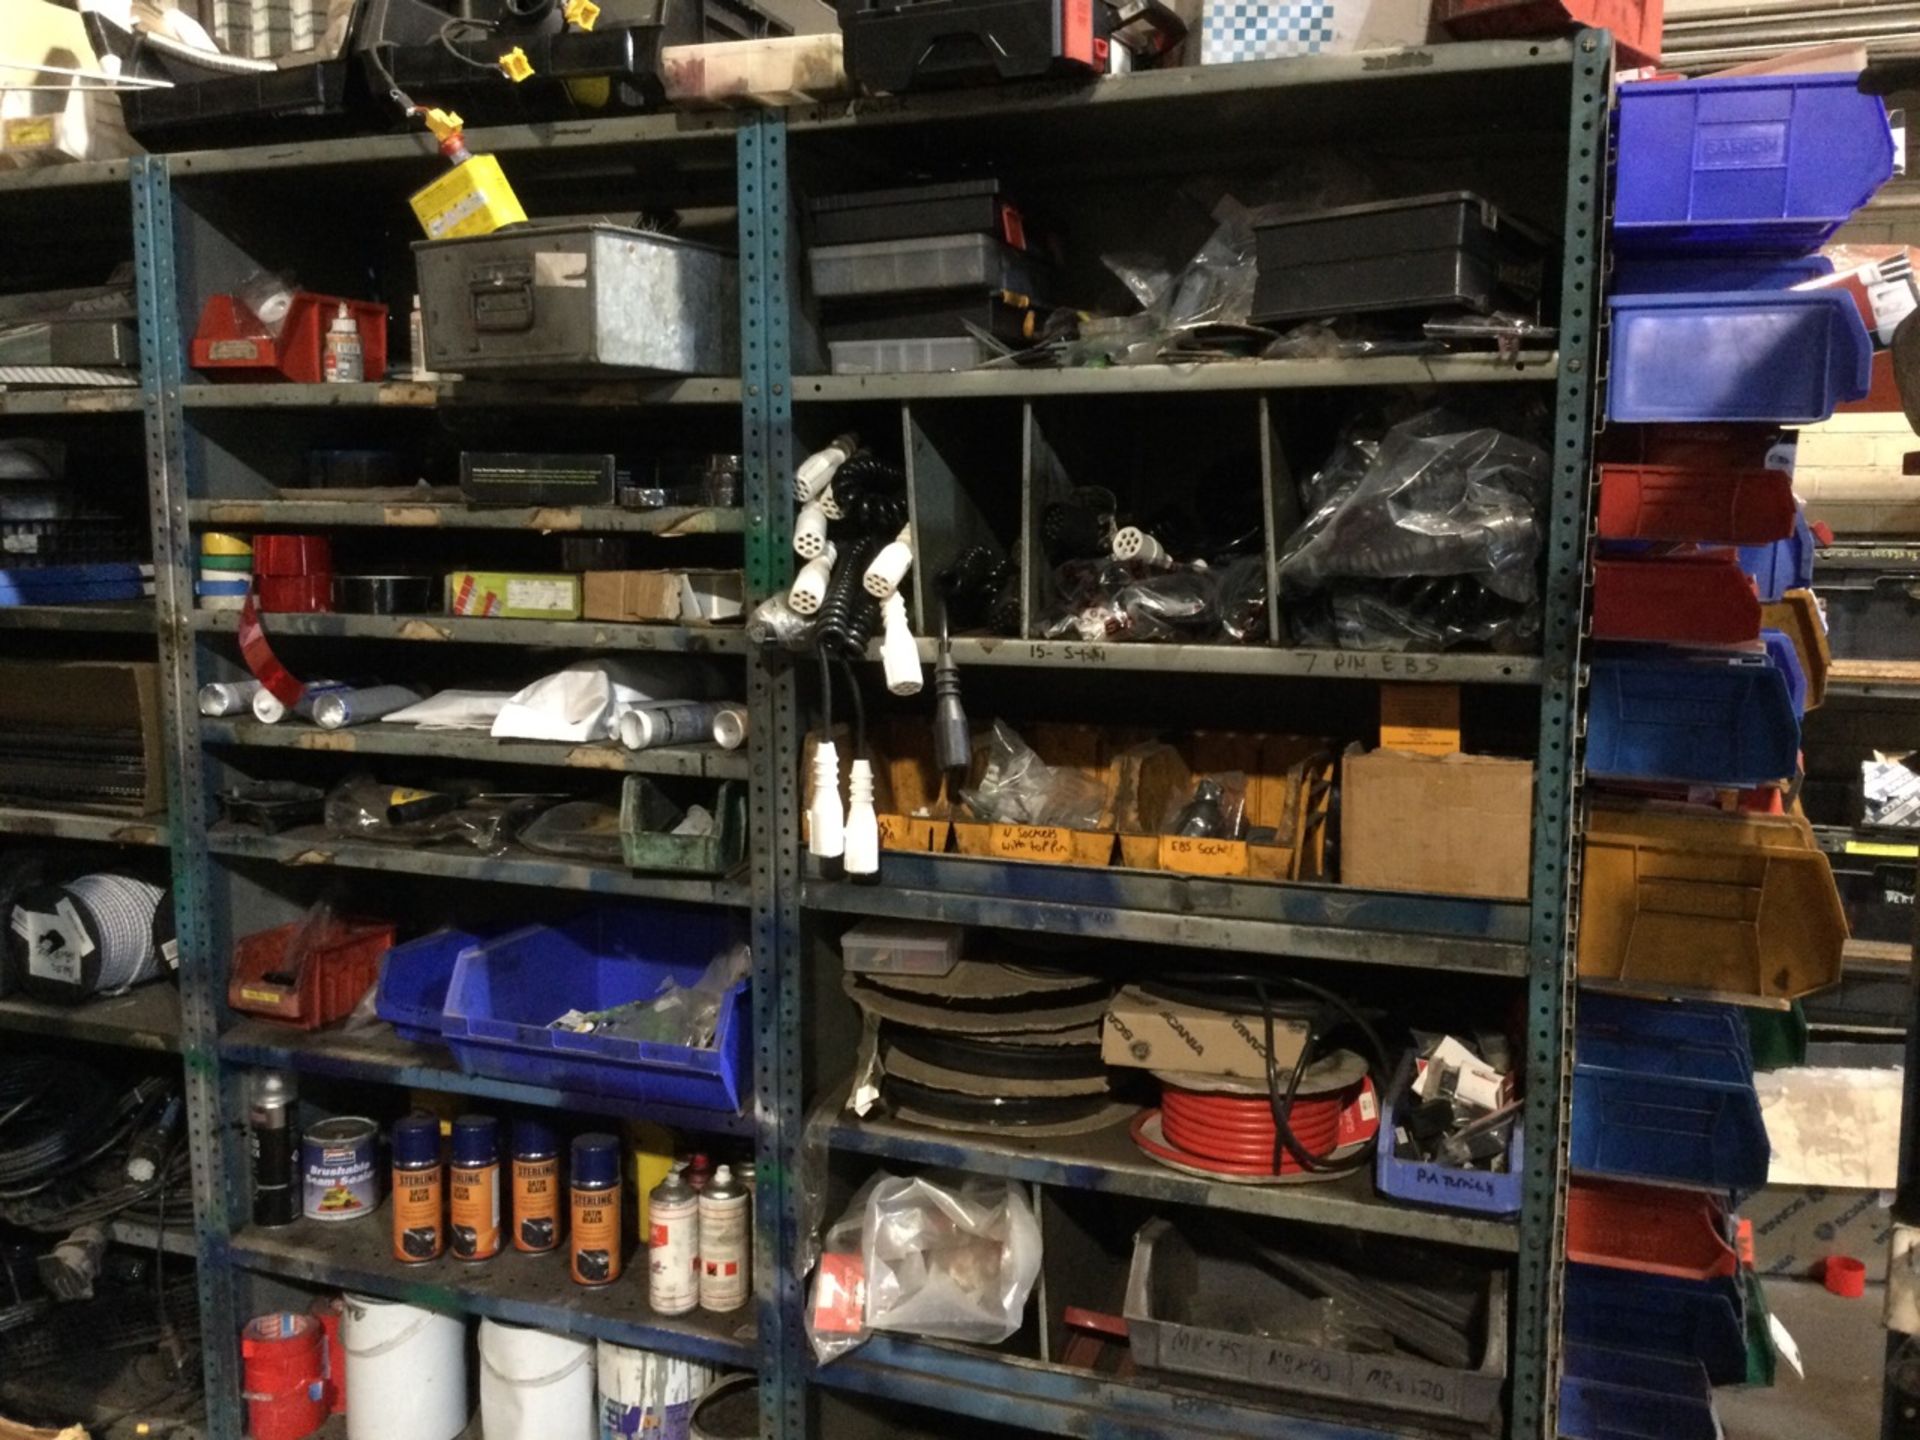 Complete Contents Of Mezzanine Floor Containing Parts, Inventory, Shelving Units Etc. - Image 4 of 9